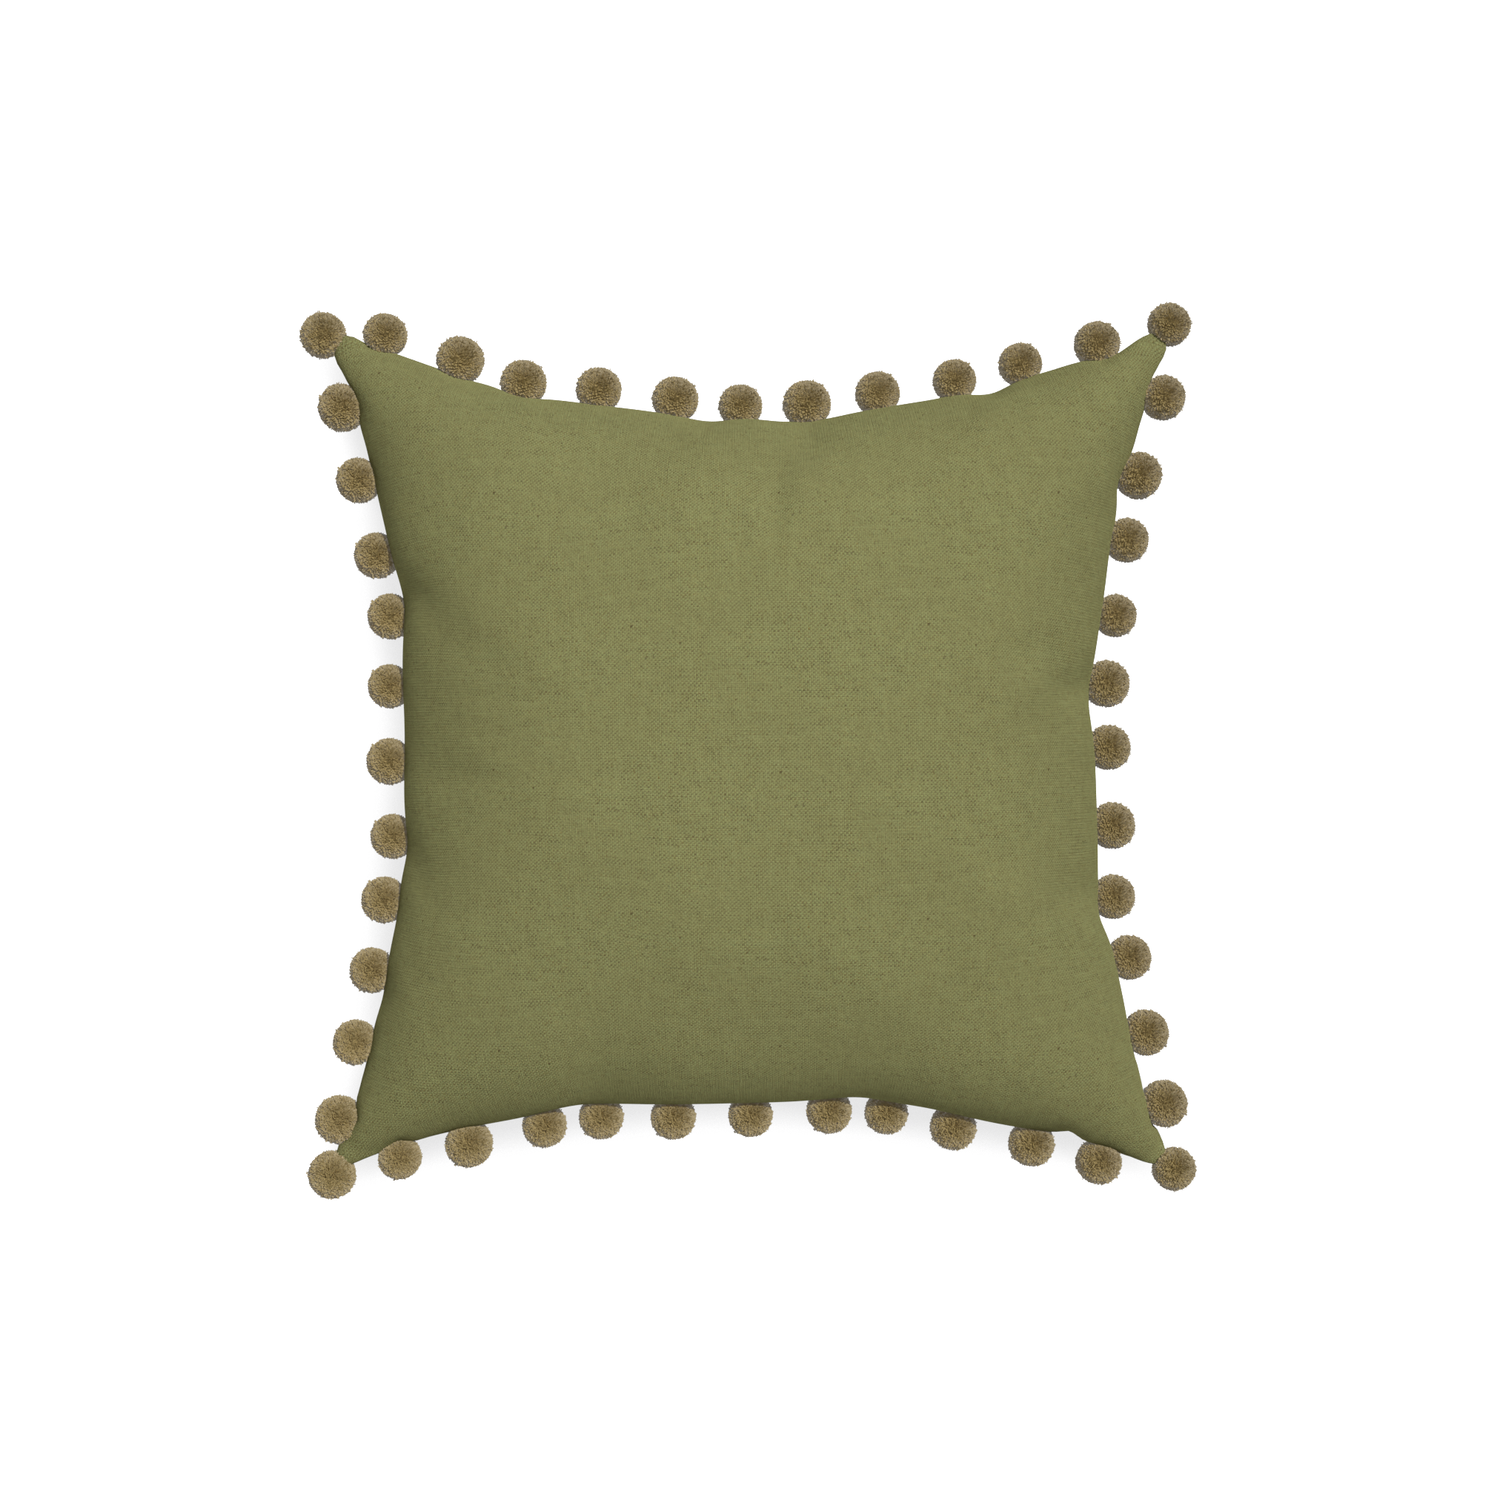 18-square moss custom moss greenpillow with olive pom pom on white background